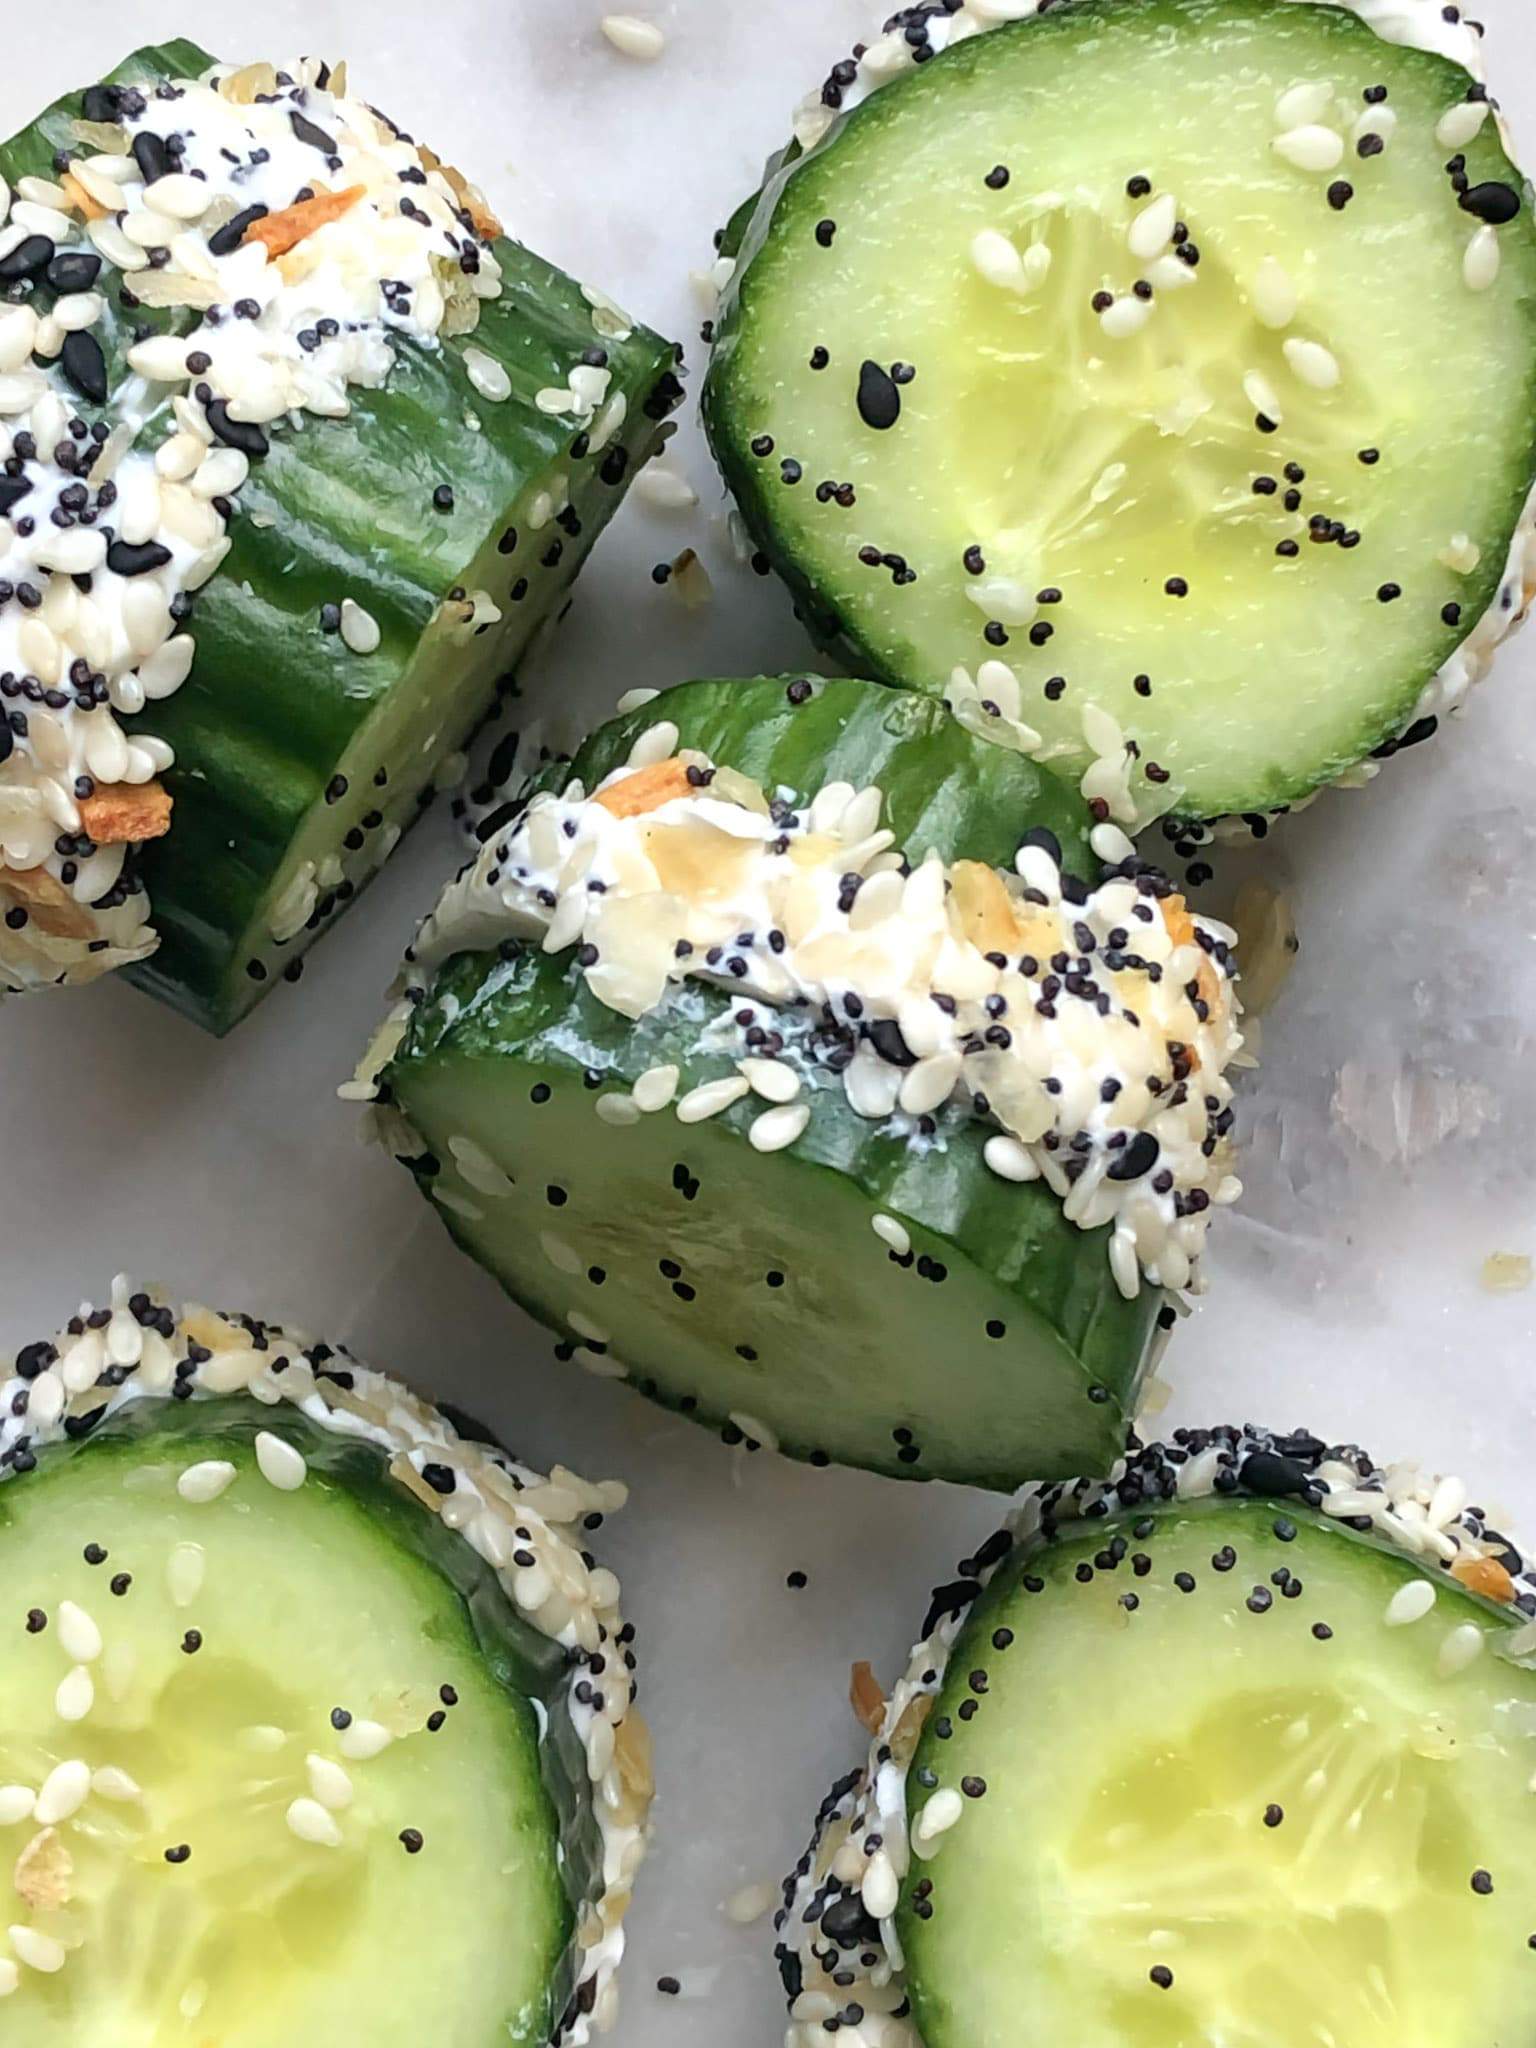 Cucumber discs made into everything bagel sandwiches